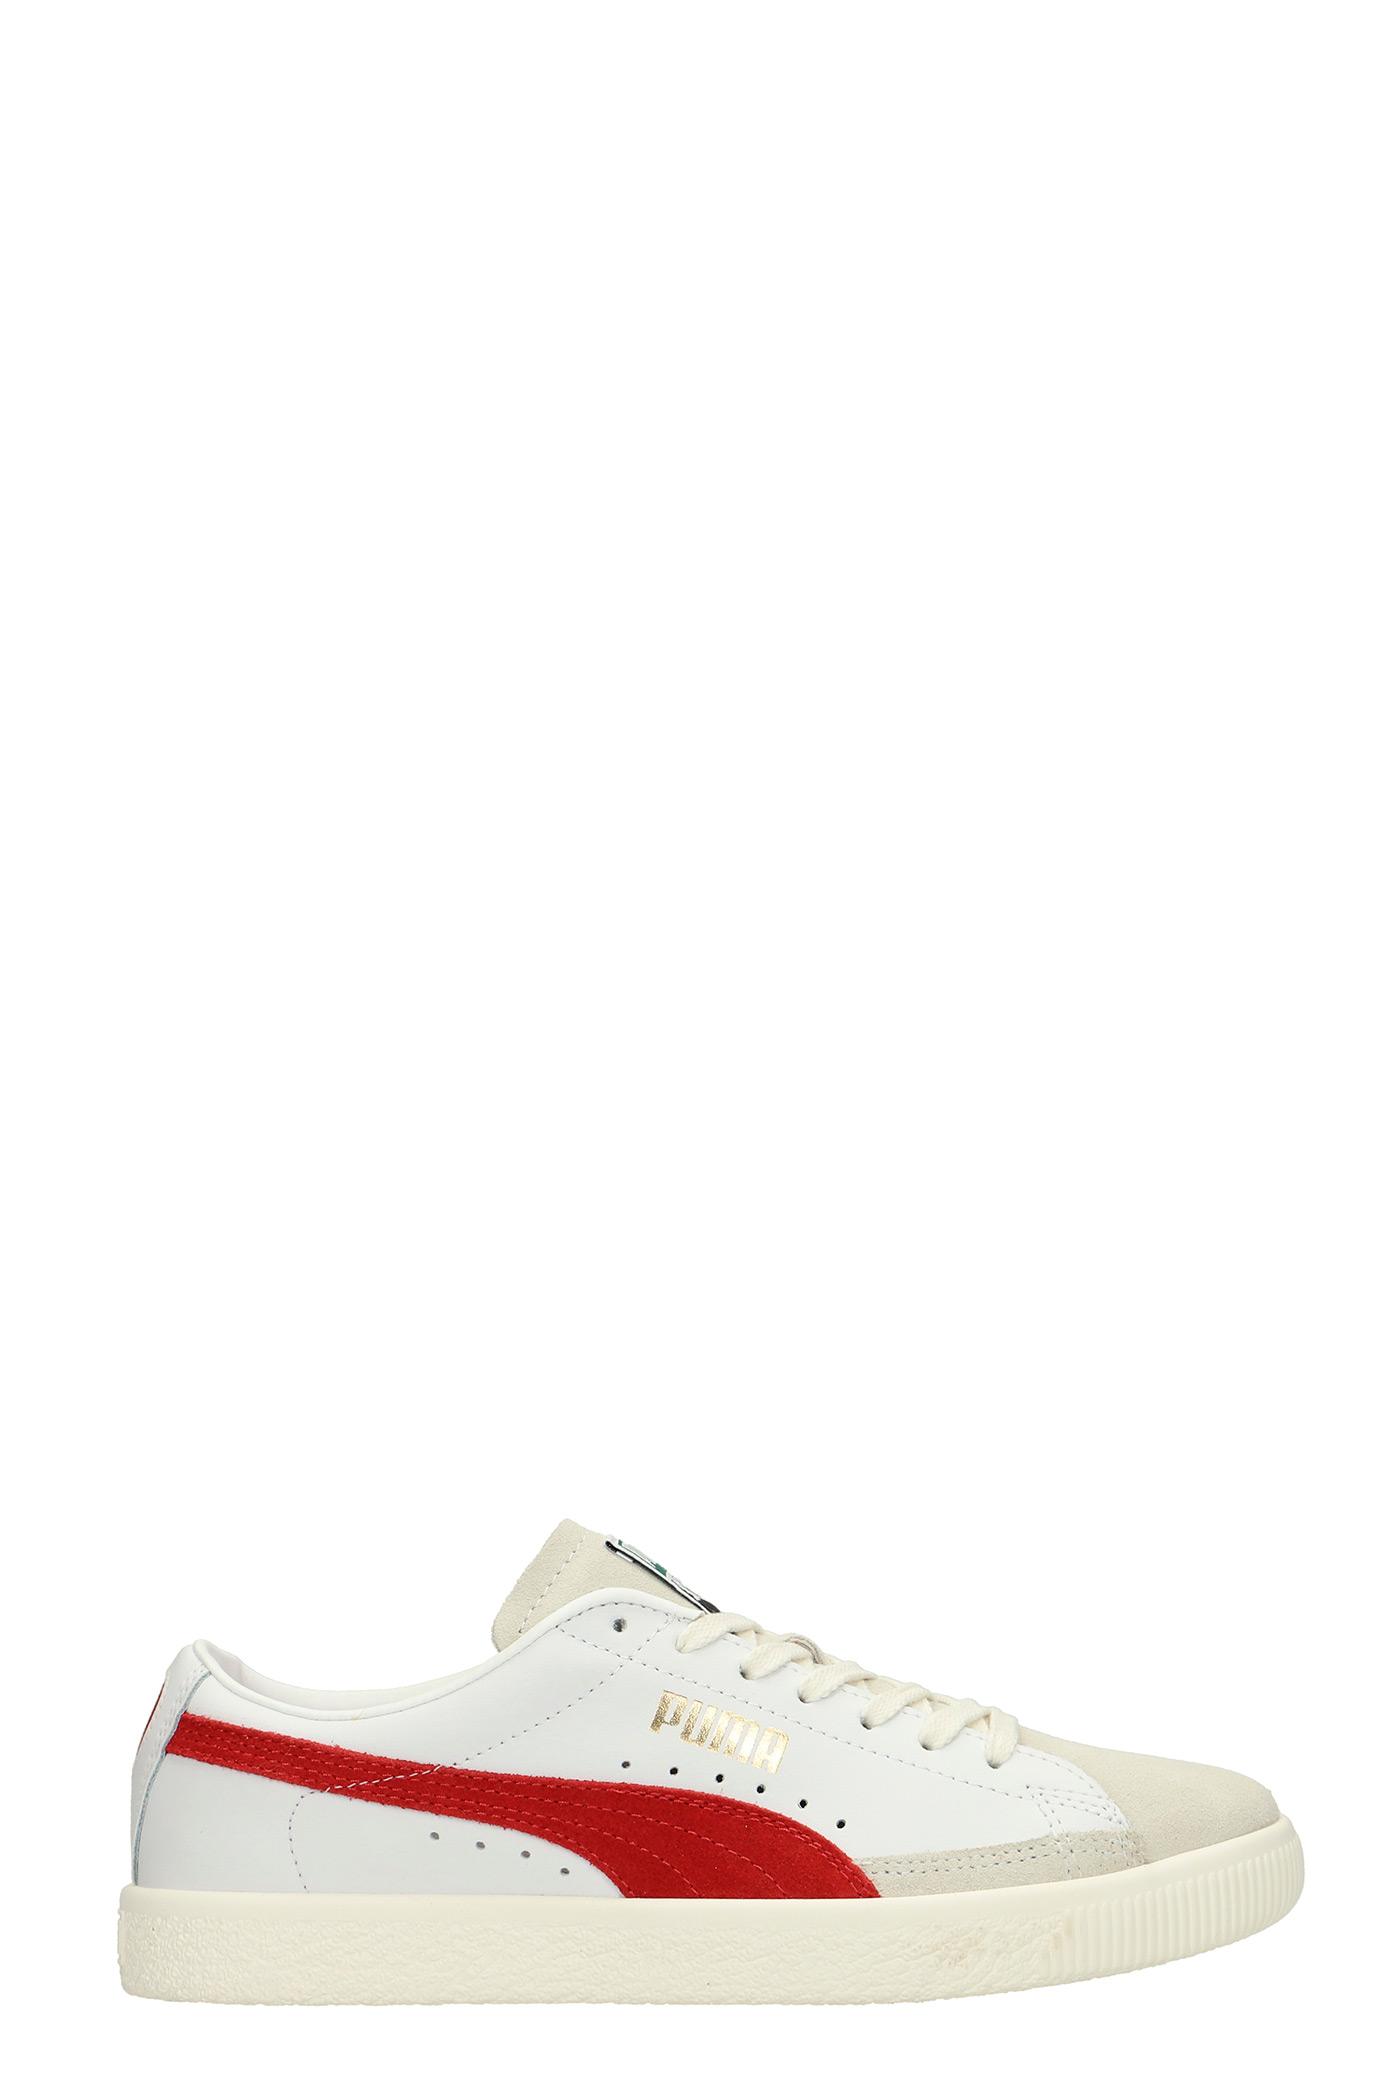 procedure orgaan Picknicken PUMA Basket Vtg Sneakers In White Suede And Leather for Men | Lyst